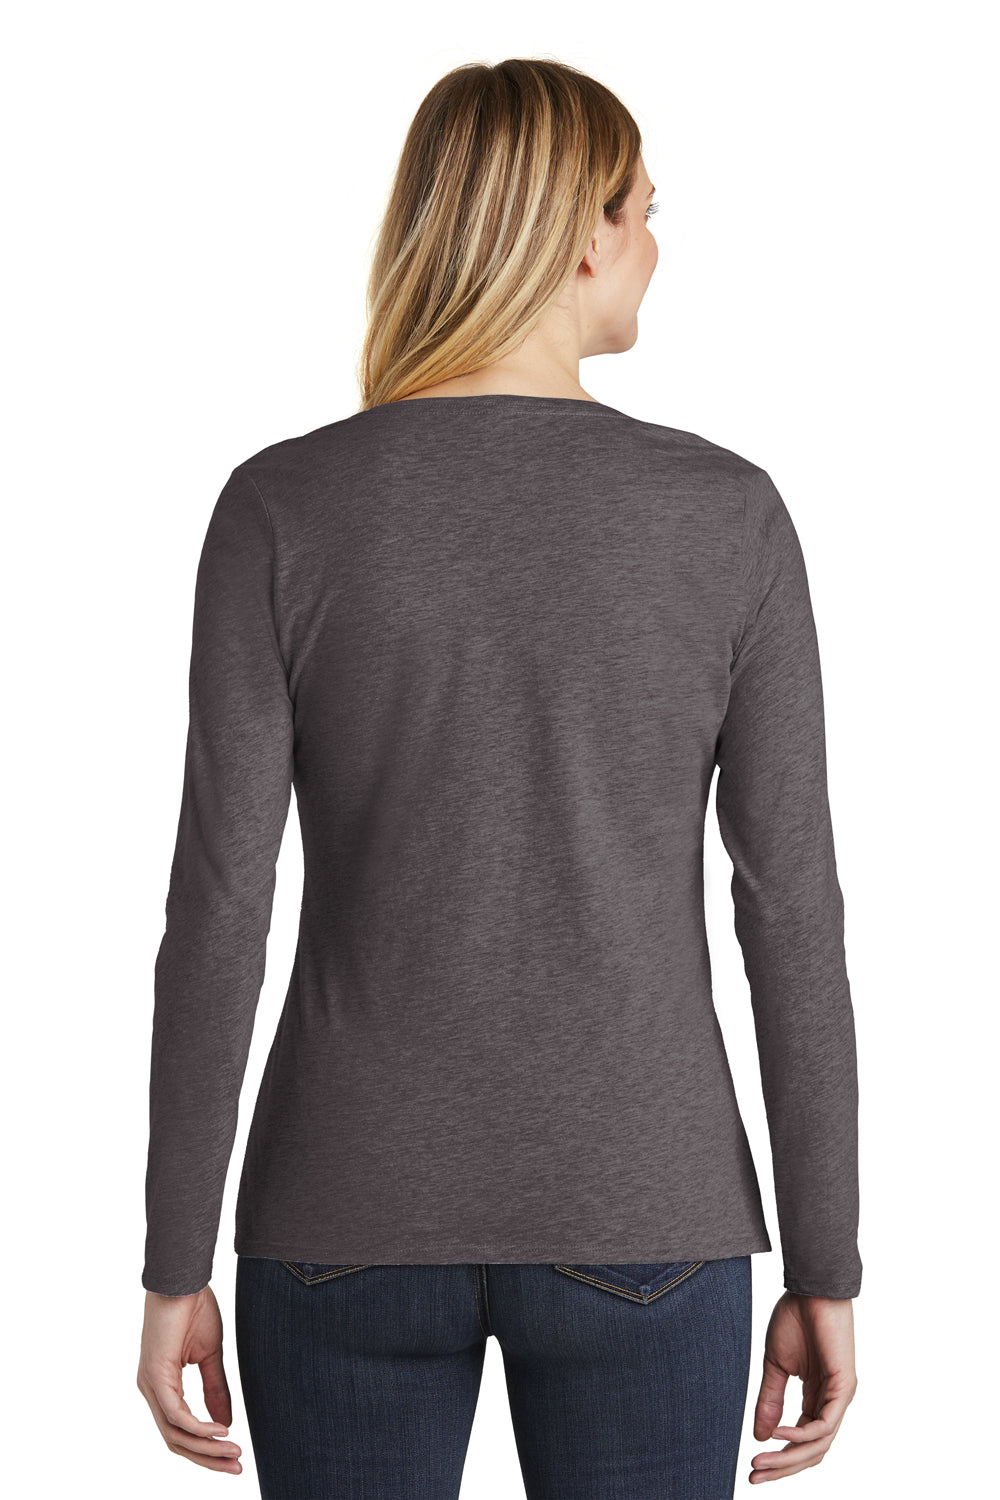 District DT6201 Womens Very Important Long Sleeve V-Neck T-Shirts Charcoal Grey Back